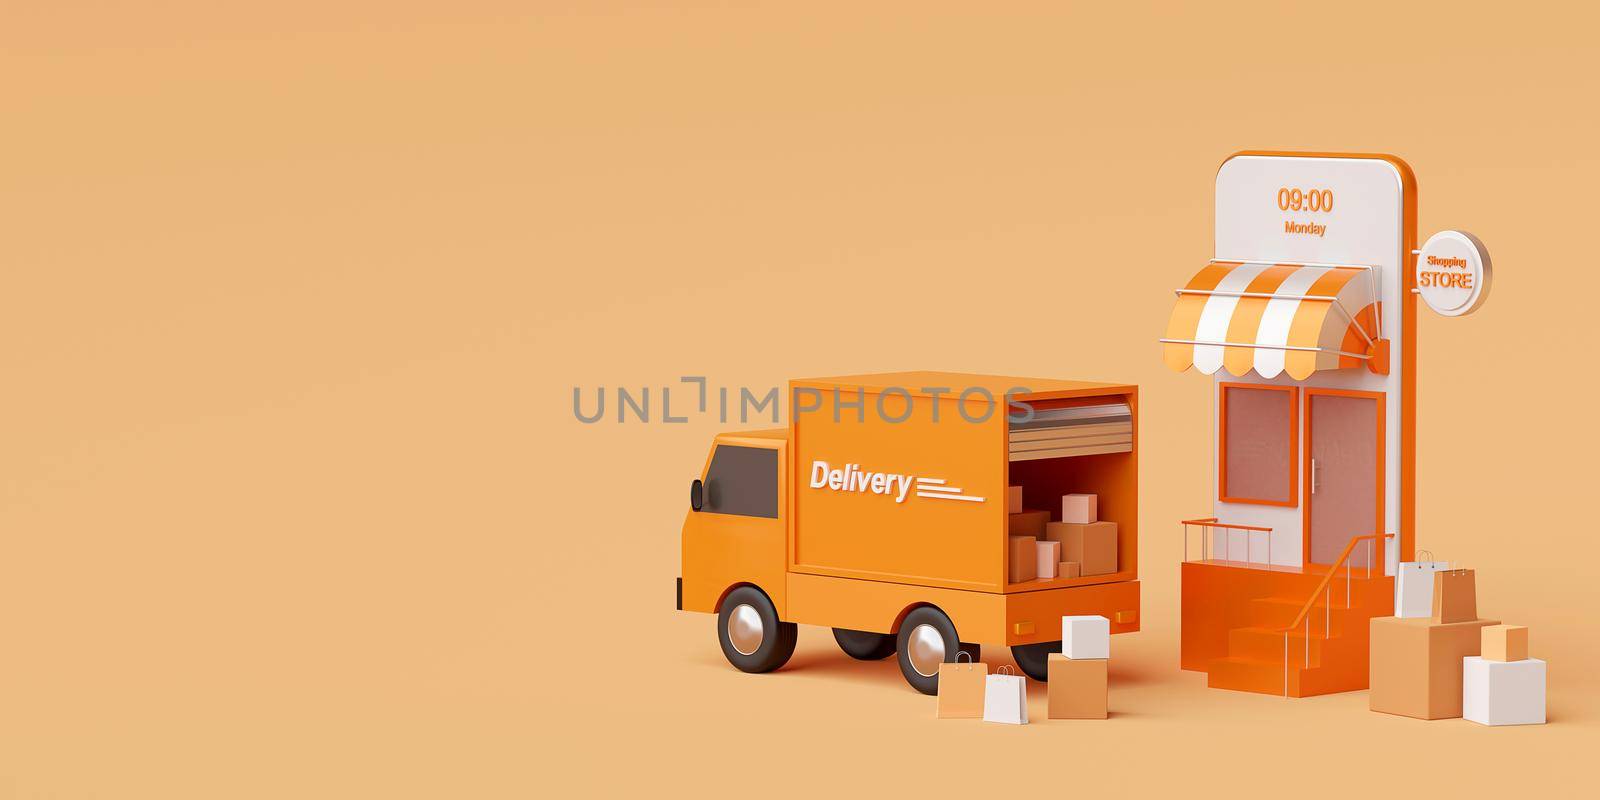 E-commerce concept, Delivery service on mobile application, Transportation delivery by truck, 3d rendering by nutzchotwarut